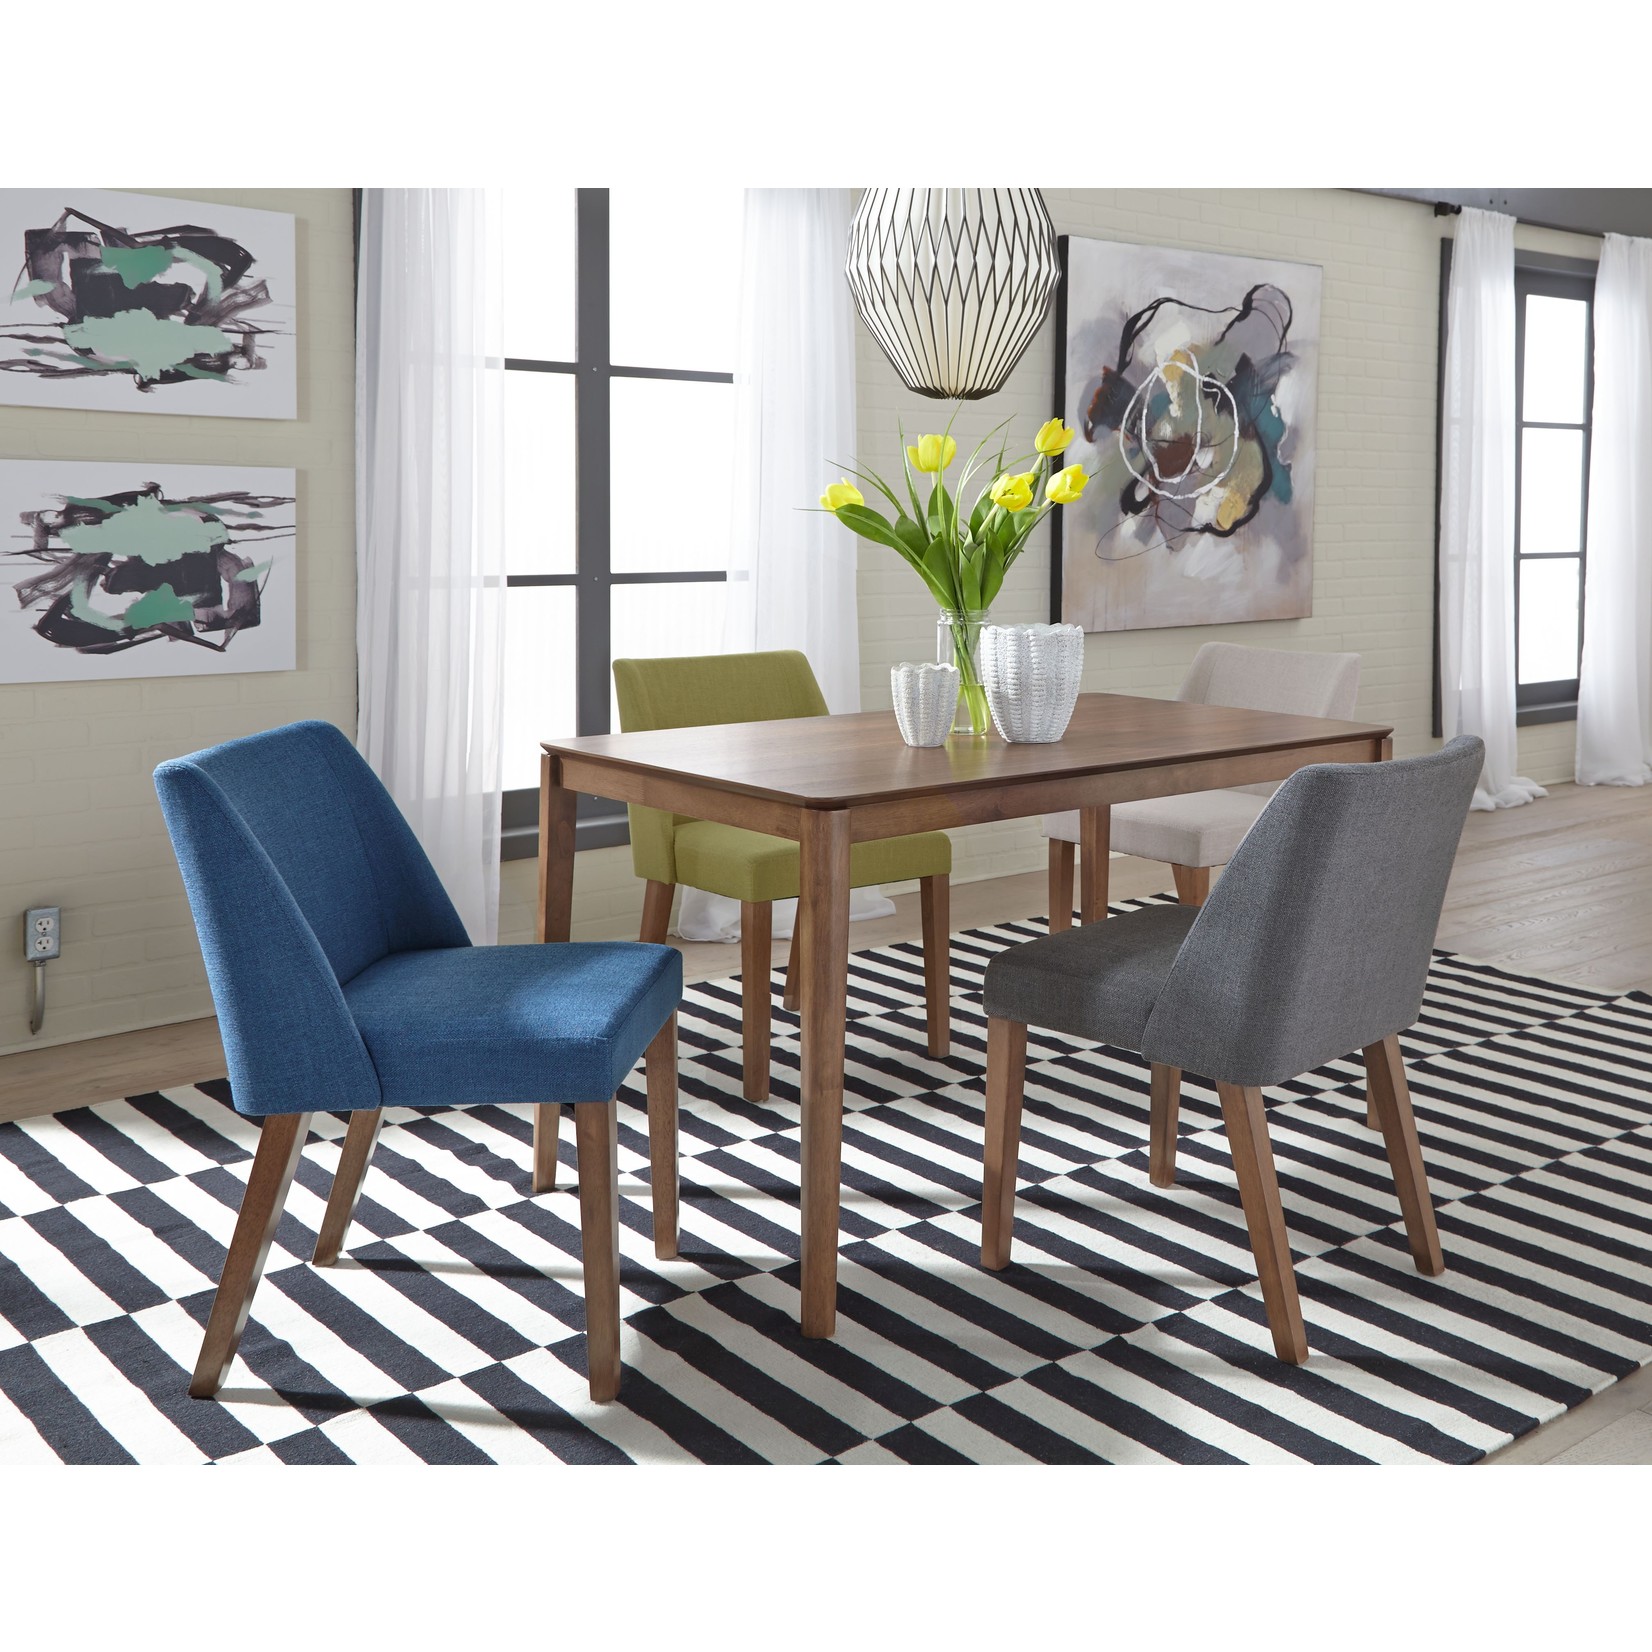 Liberty Furniture 5 Piece Rect table set. With 4  Grey chairs